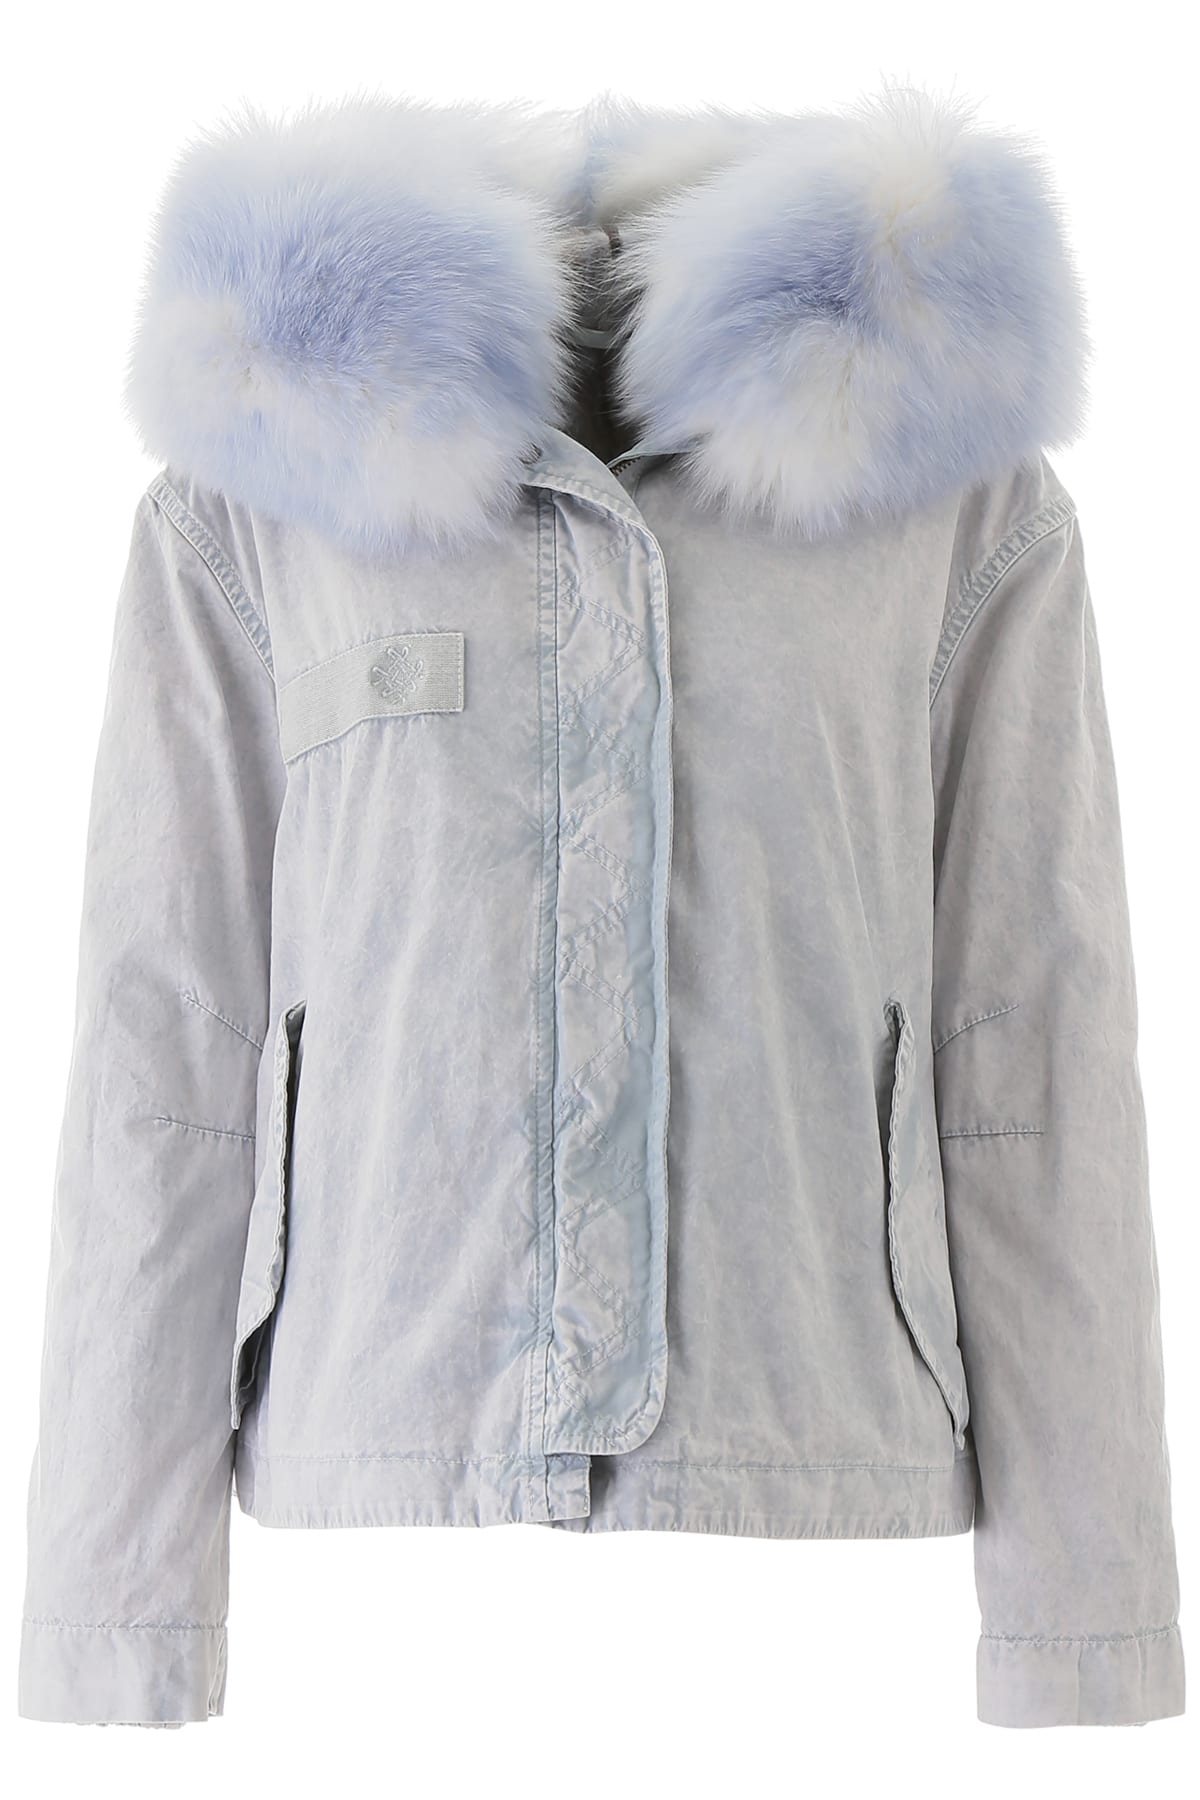 MR & MRS ITALY CROPPED PARKA WITH FUR,11118570